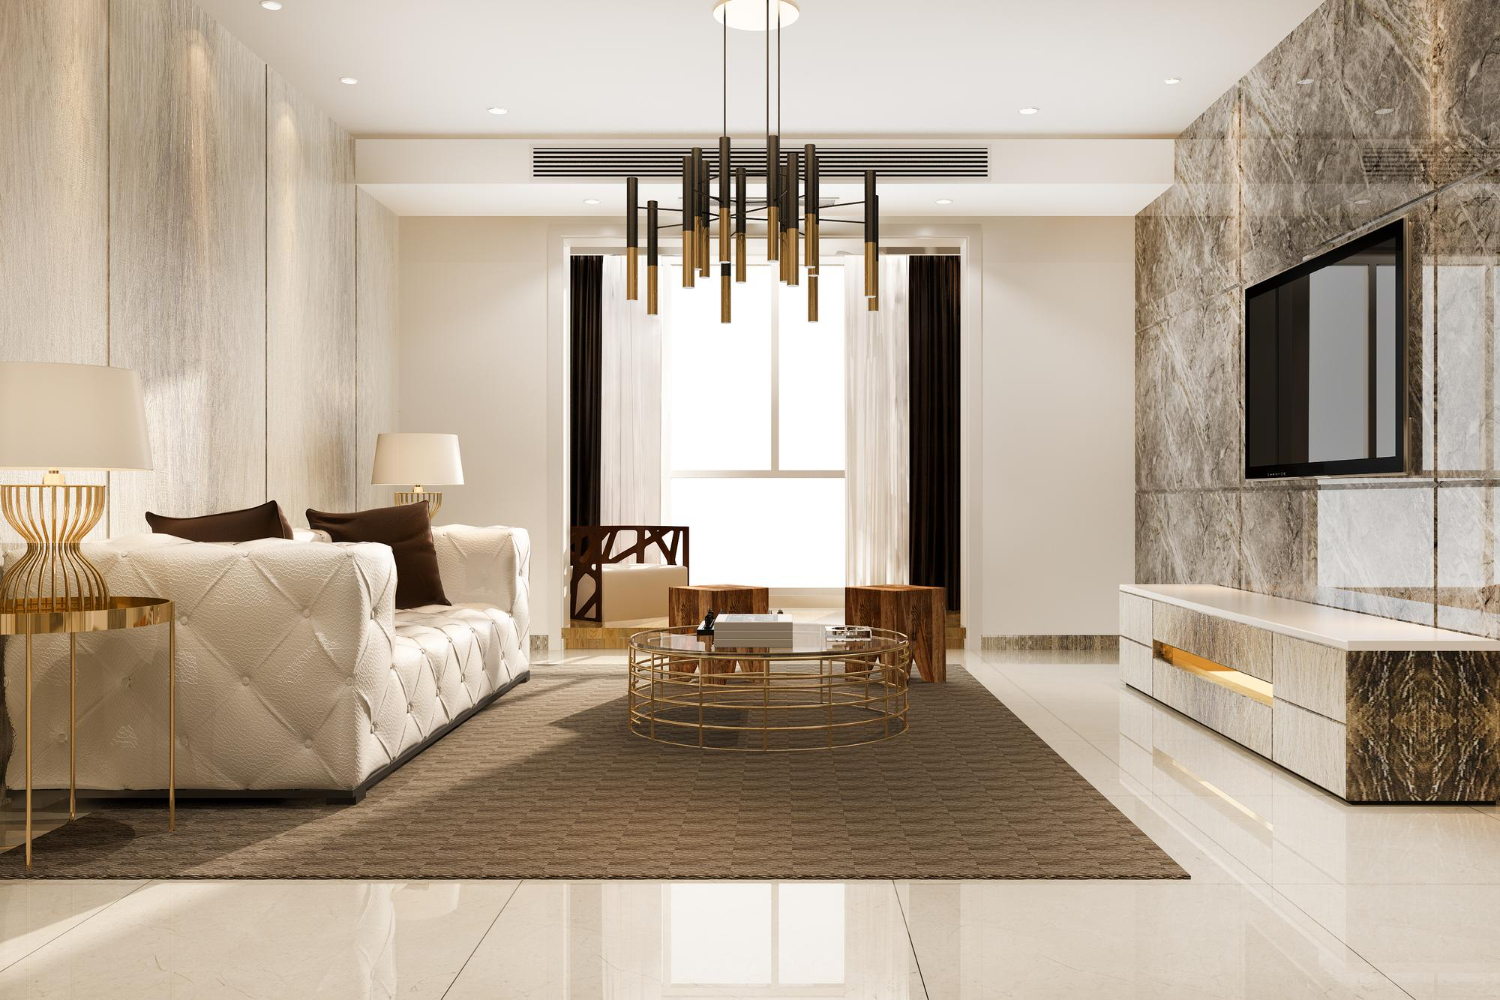 How to Make Your Interior Design Reflect Your Style?